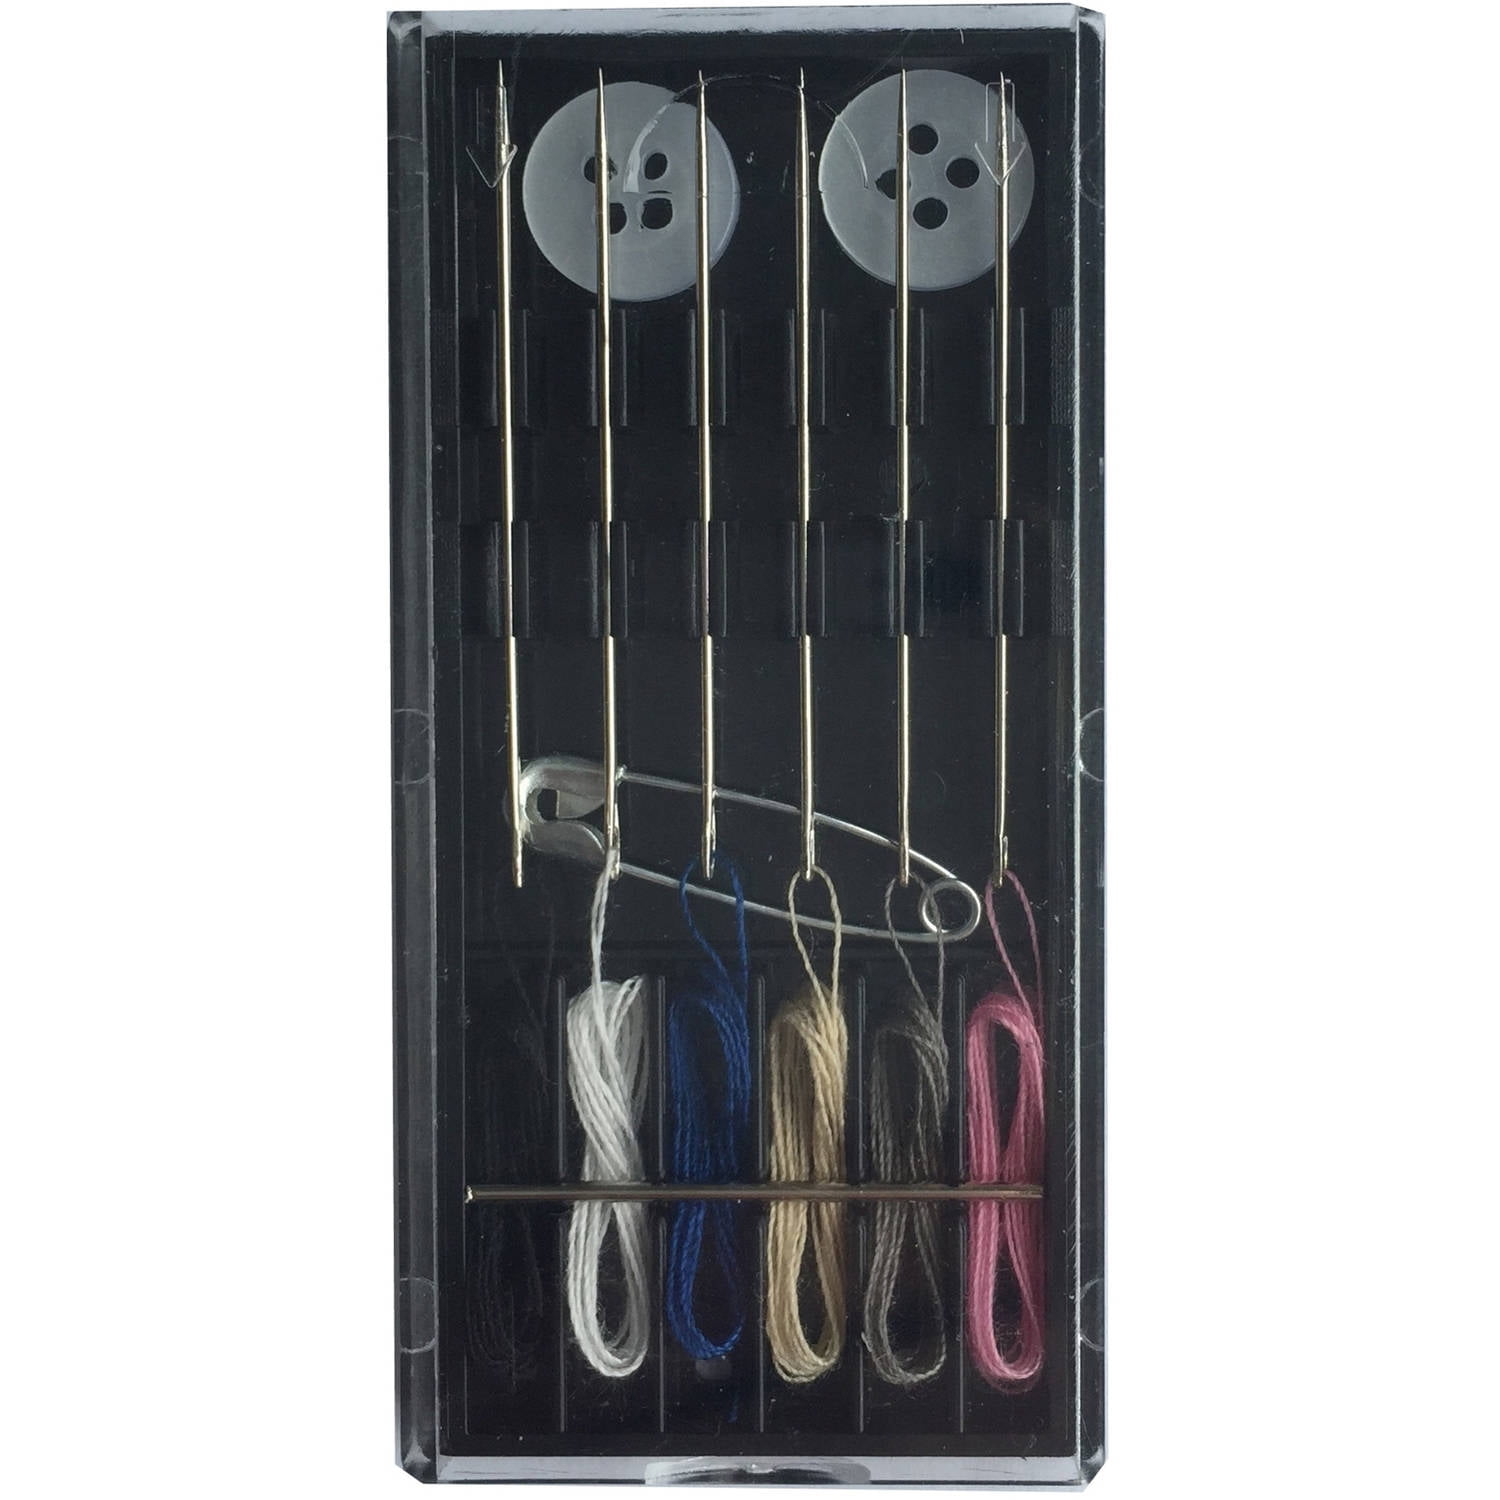 Small Sewing Travel Kit, 9 Piece notions in one black case 